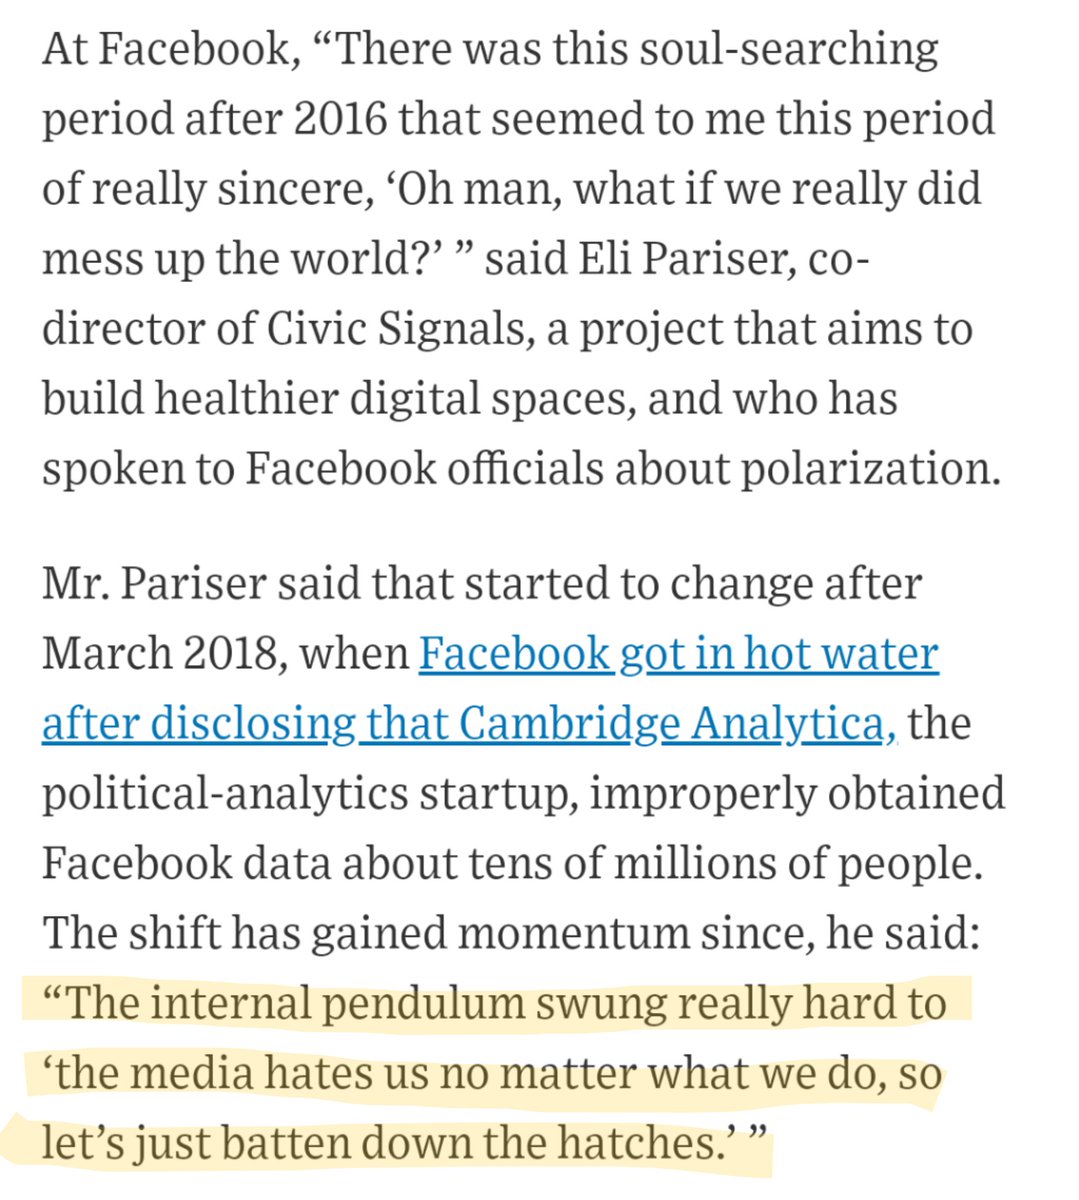 At Facebook, there was this soul-searching period after 2016, but that checked after March 2018: “The internal pendulum swung really hard to ‘the media hates us no matter what we do, so let’s just batten down the hatches.’ ”